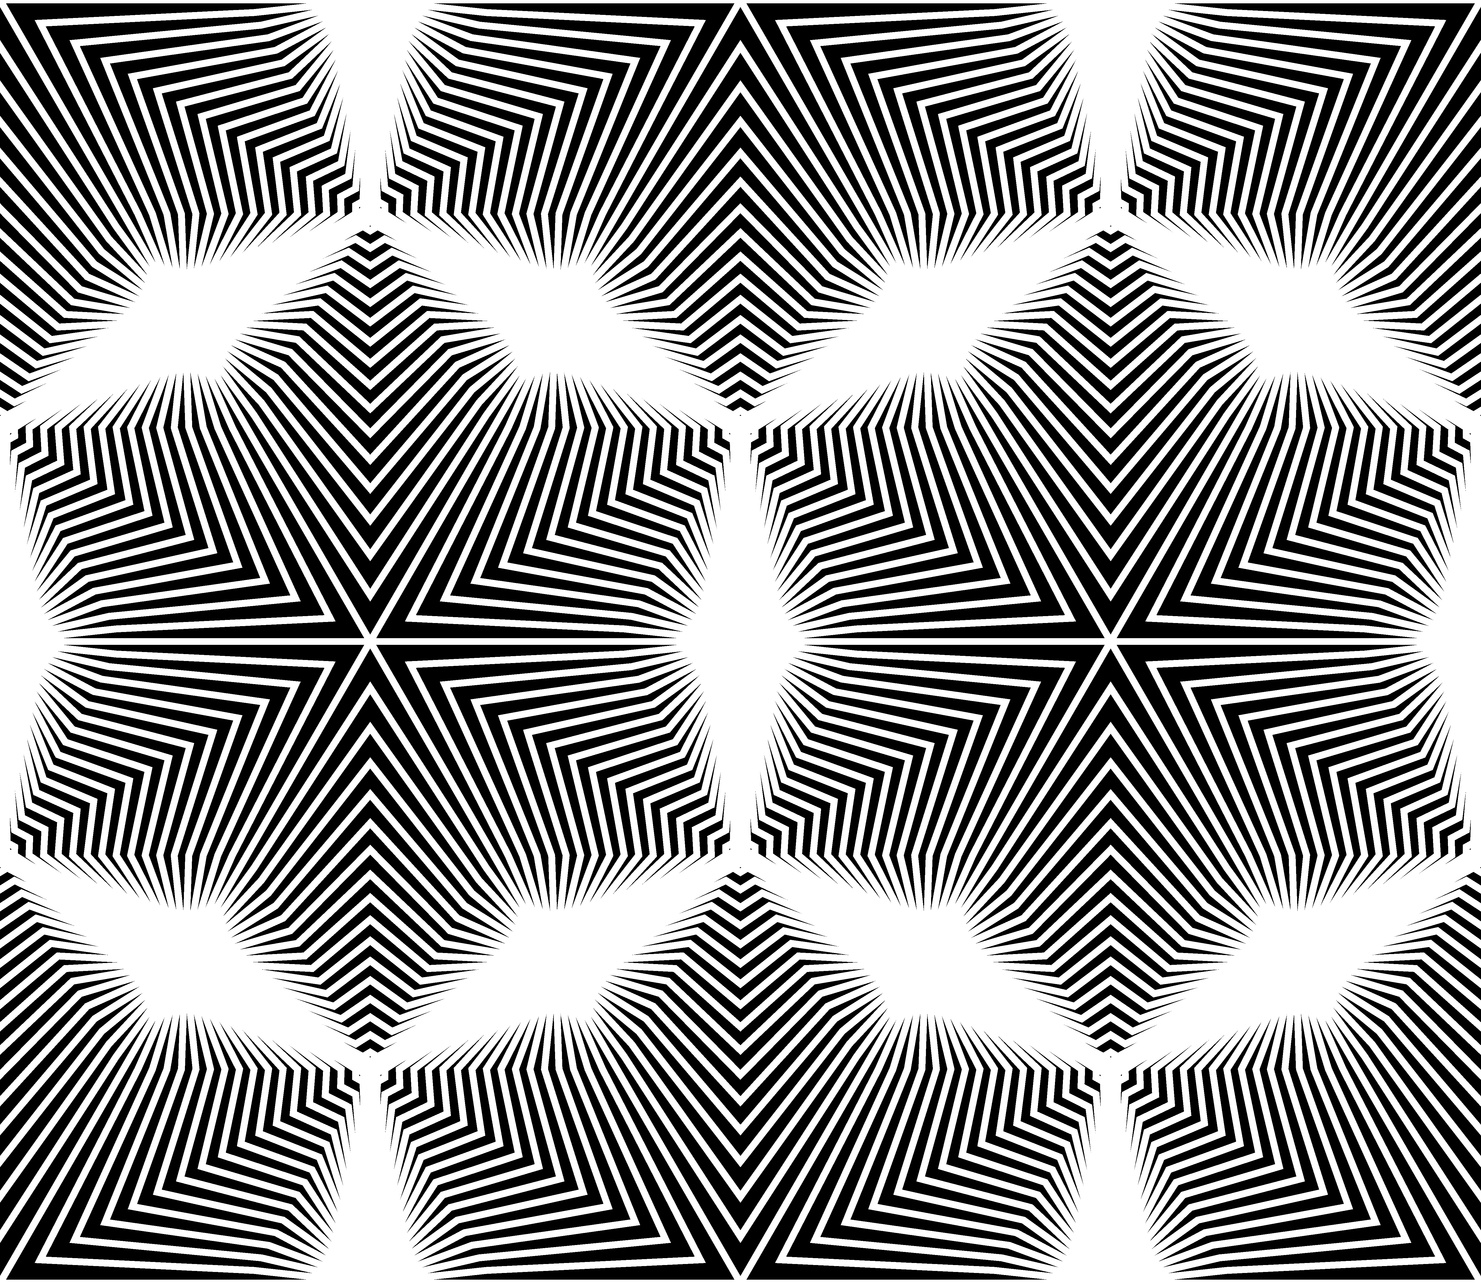 A Trippy Black and White Poster